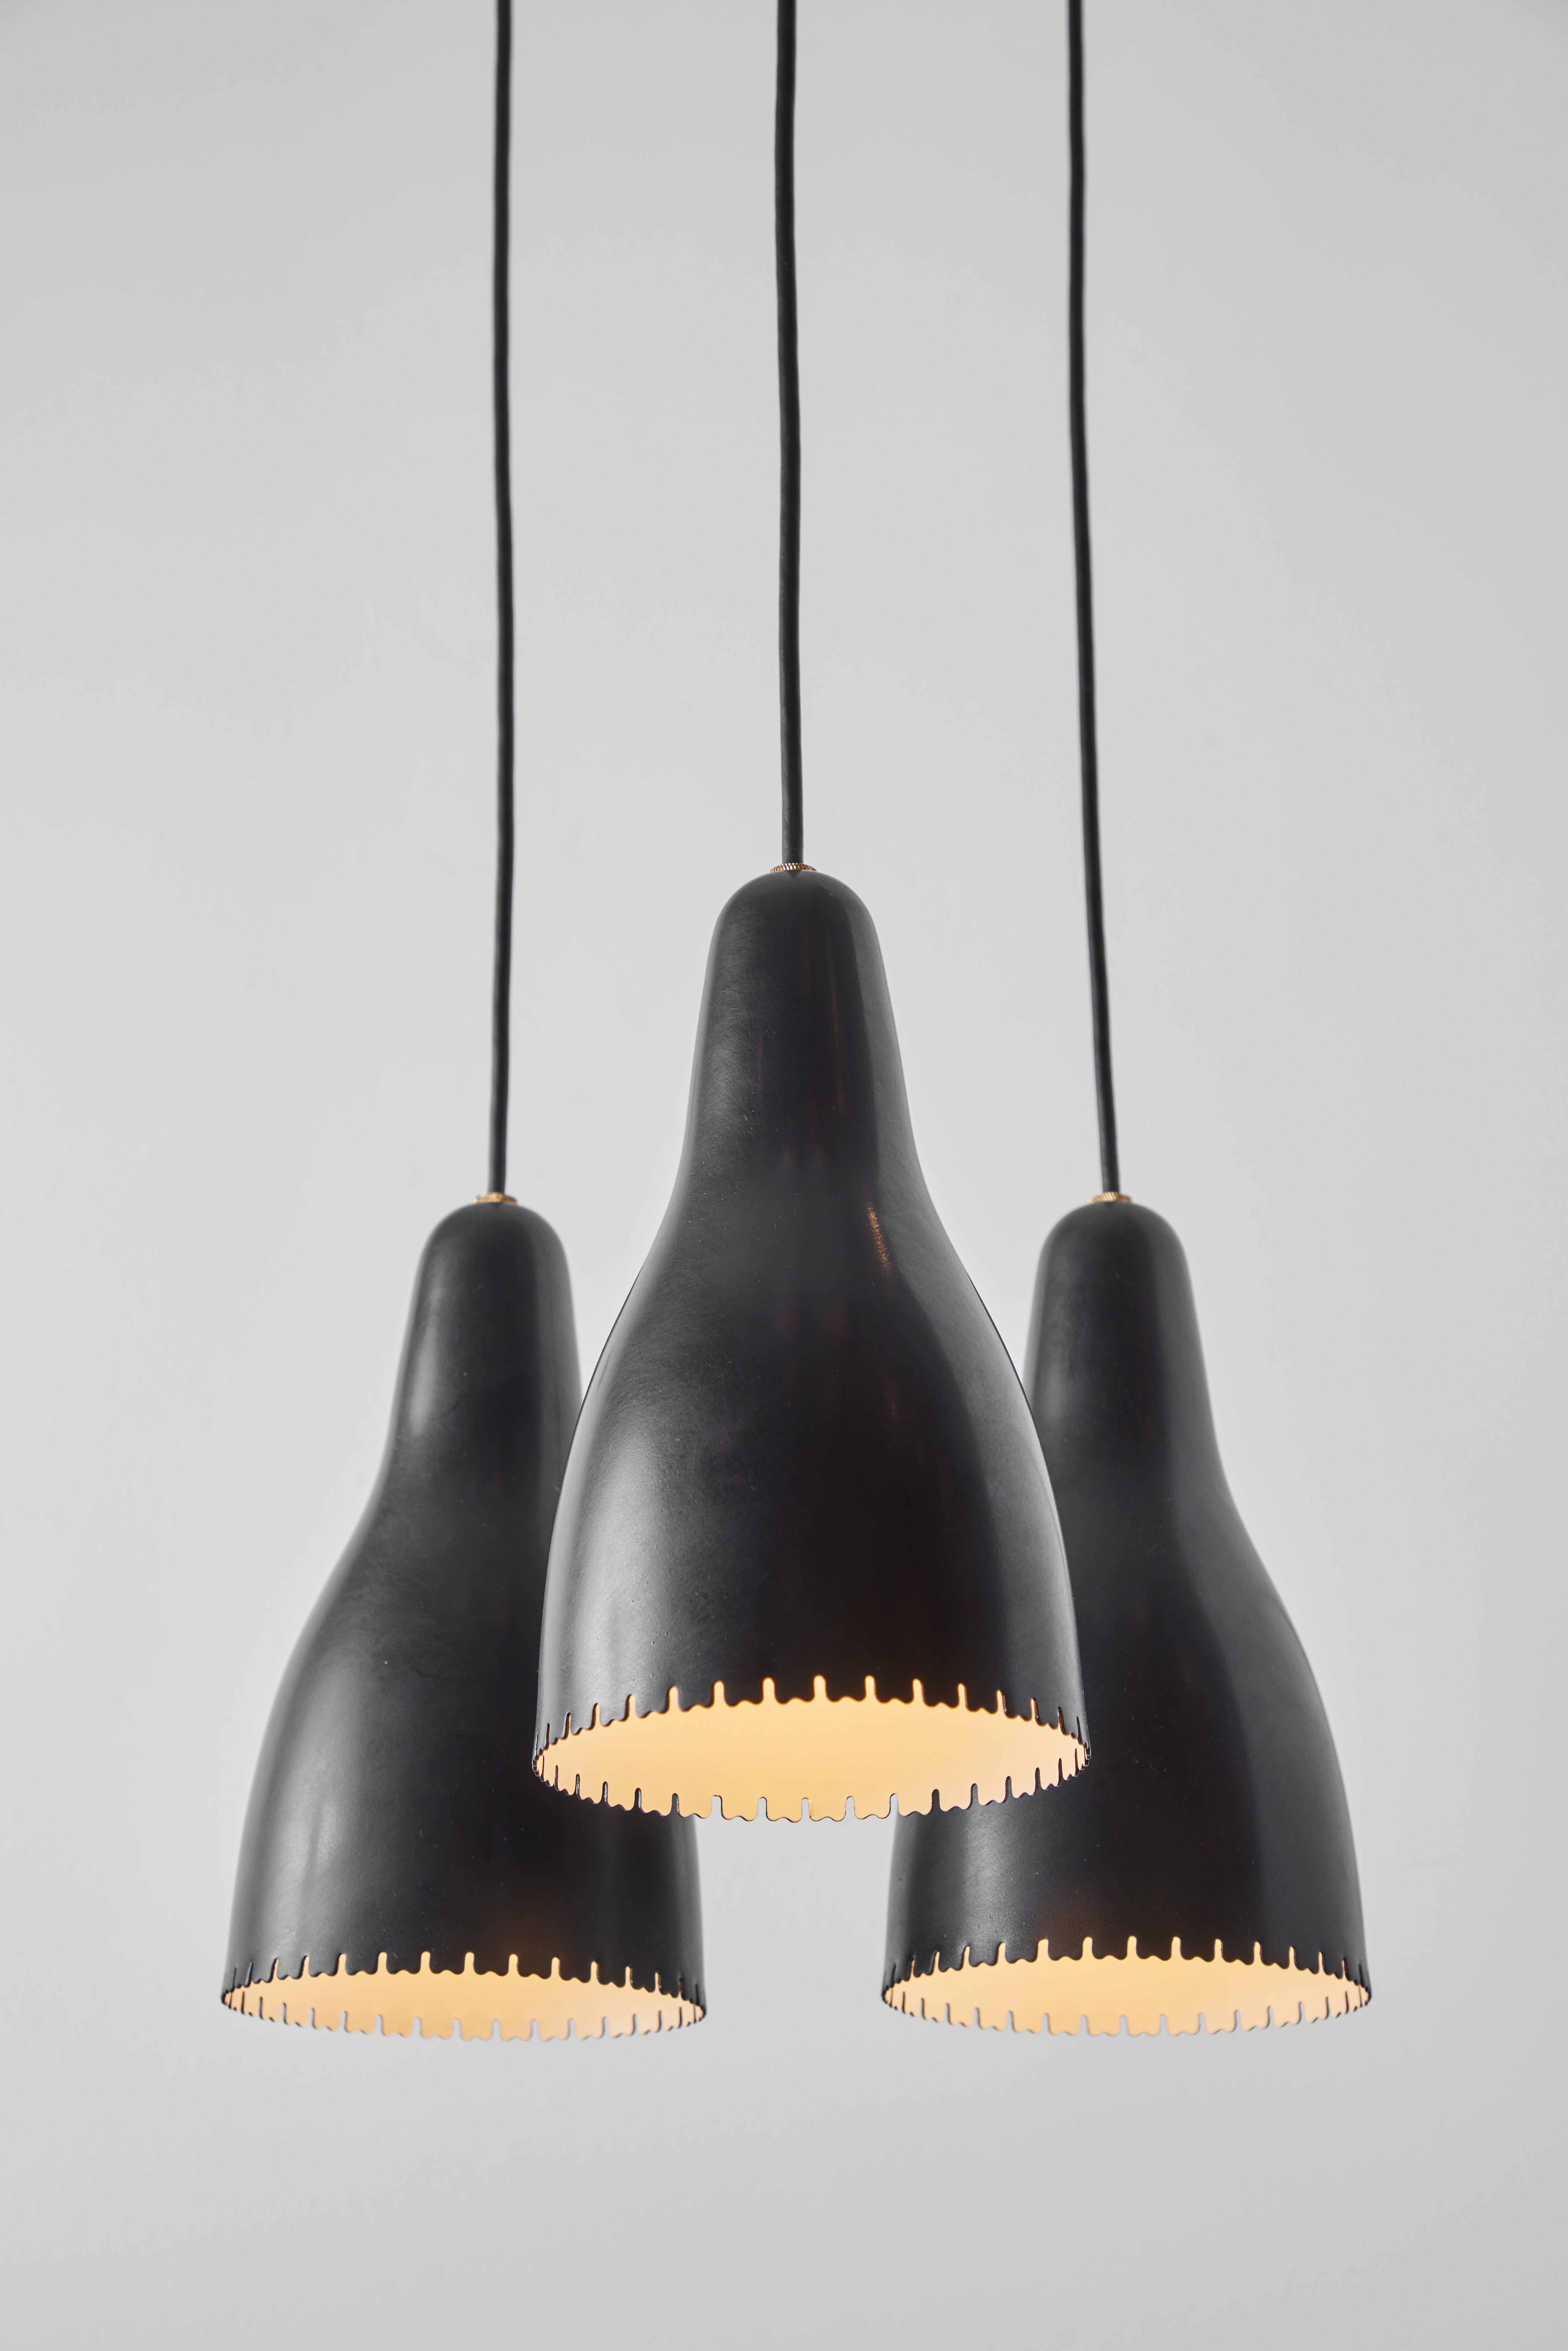 1950s Bent Karlby 3-shade chandelier in black painted metal & brass for Lyfa. Executed in architecturally cut and elegantly shaped black painted metal shades with brass hardware, Denmark, circa 1950s. A quintessentially Danish Modern chandelier by a